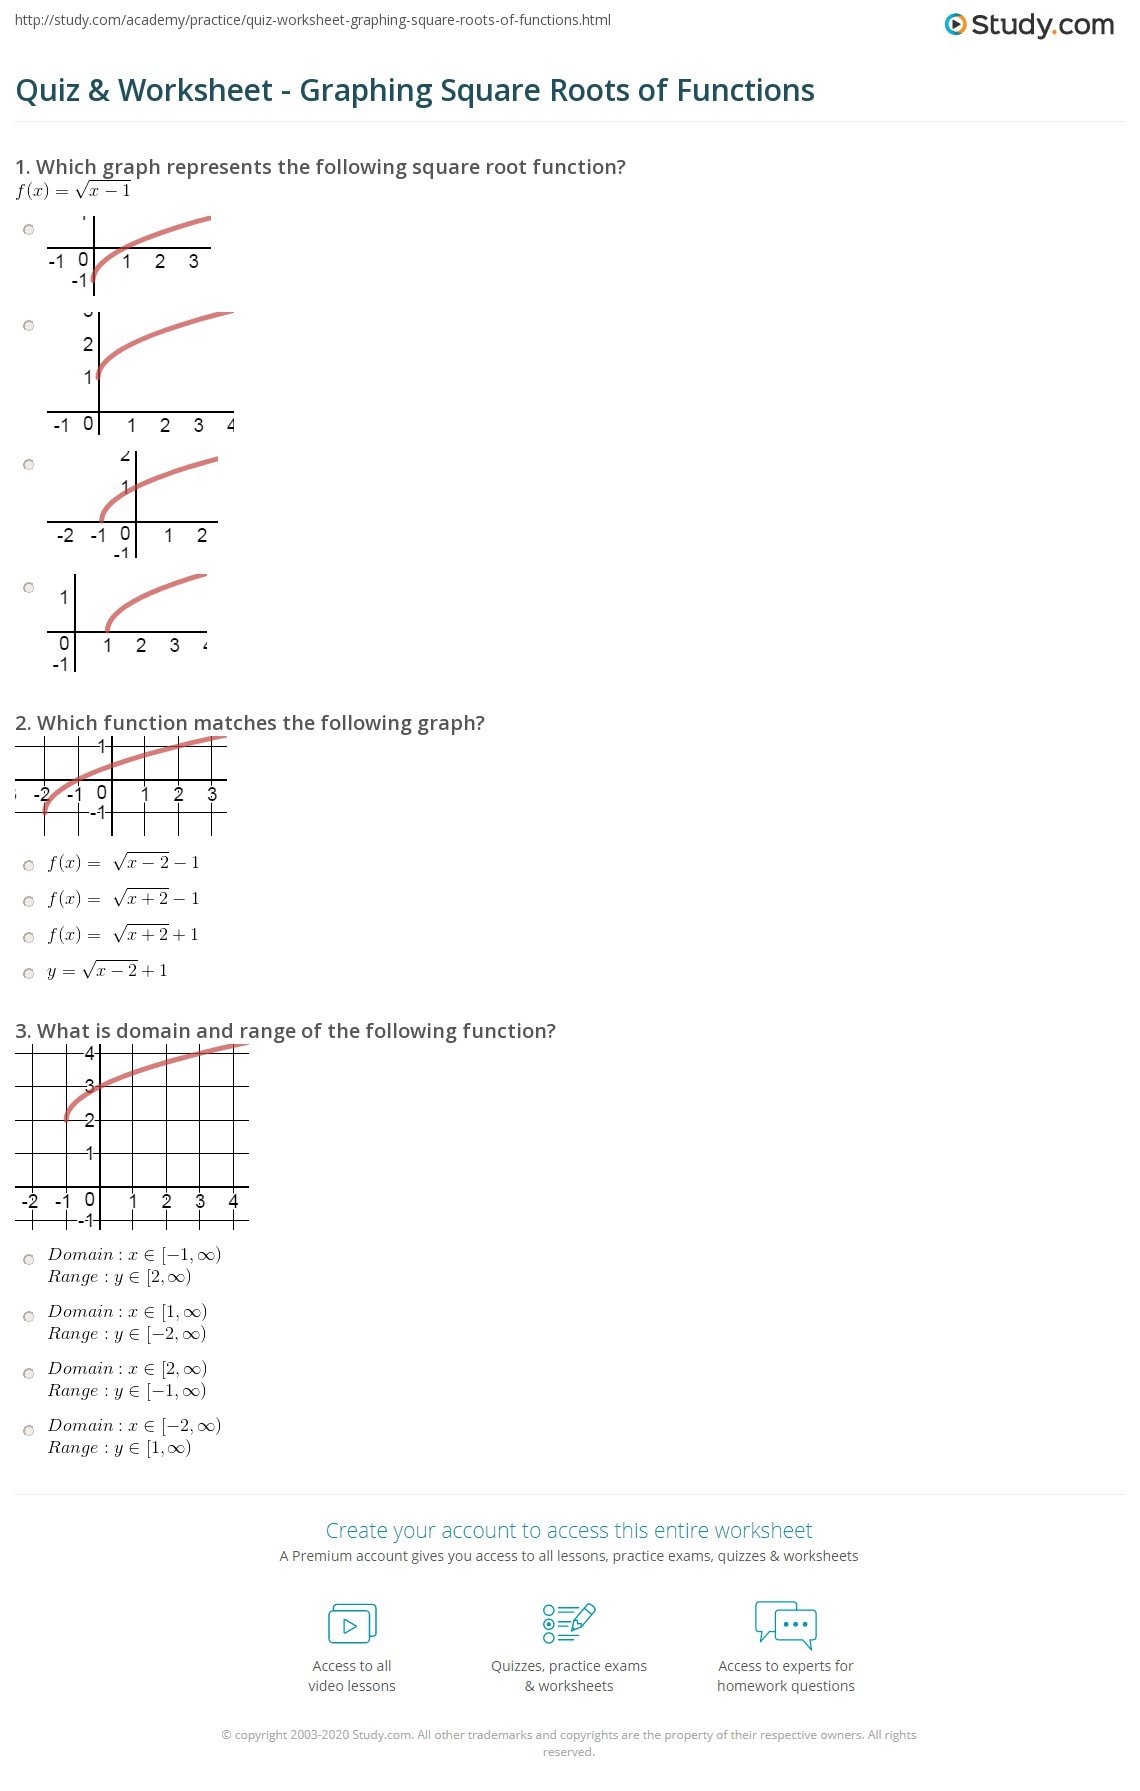 31 Graphing Square Root Functions Worksheet Answers